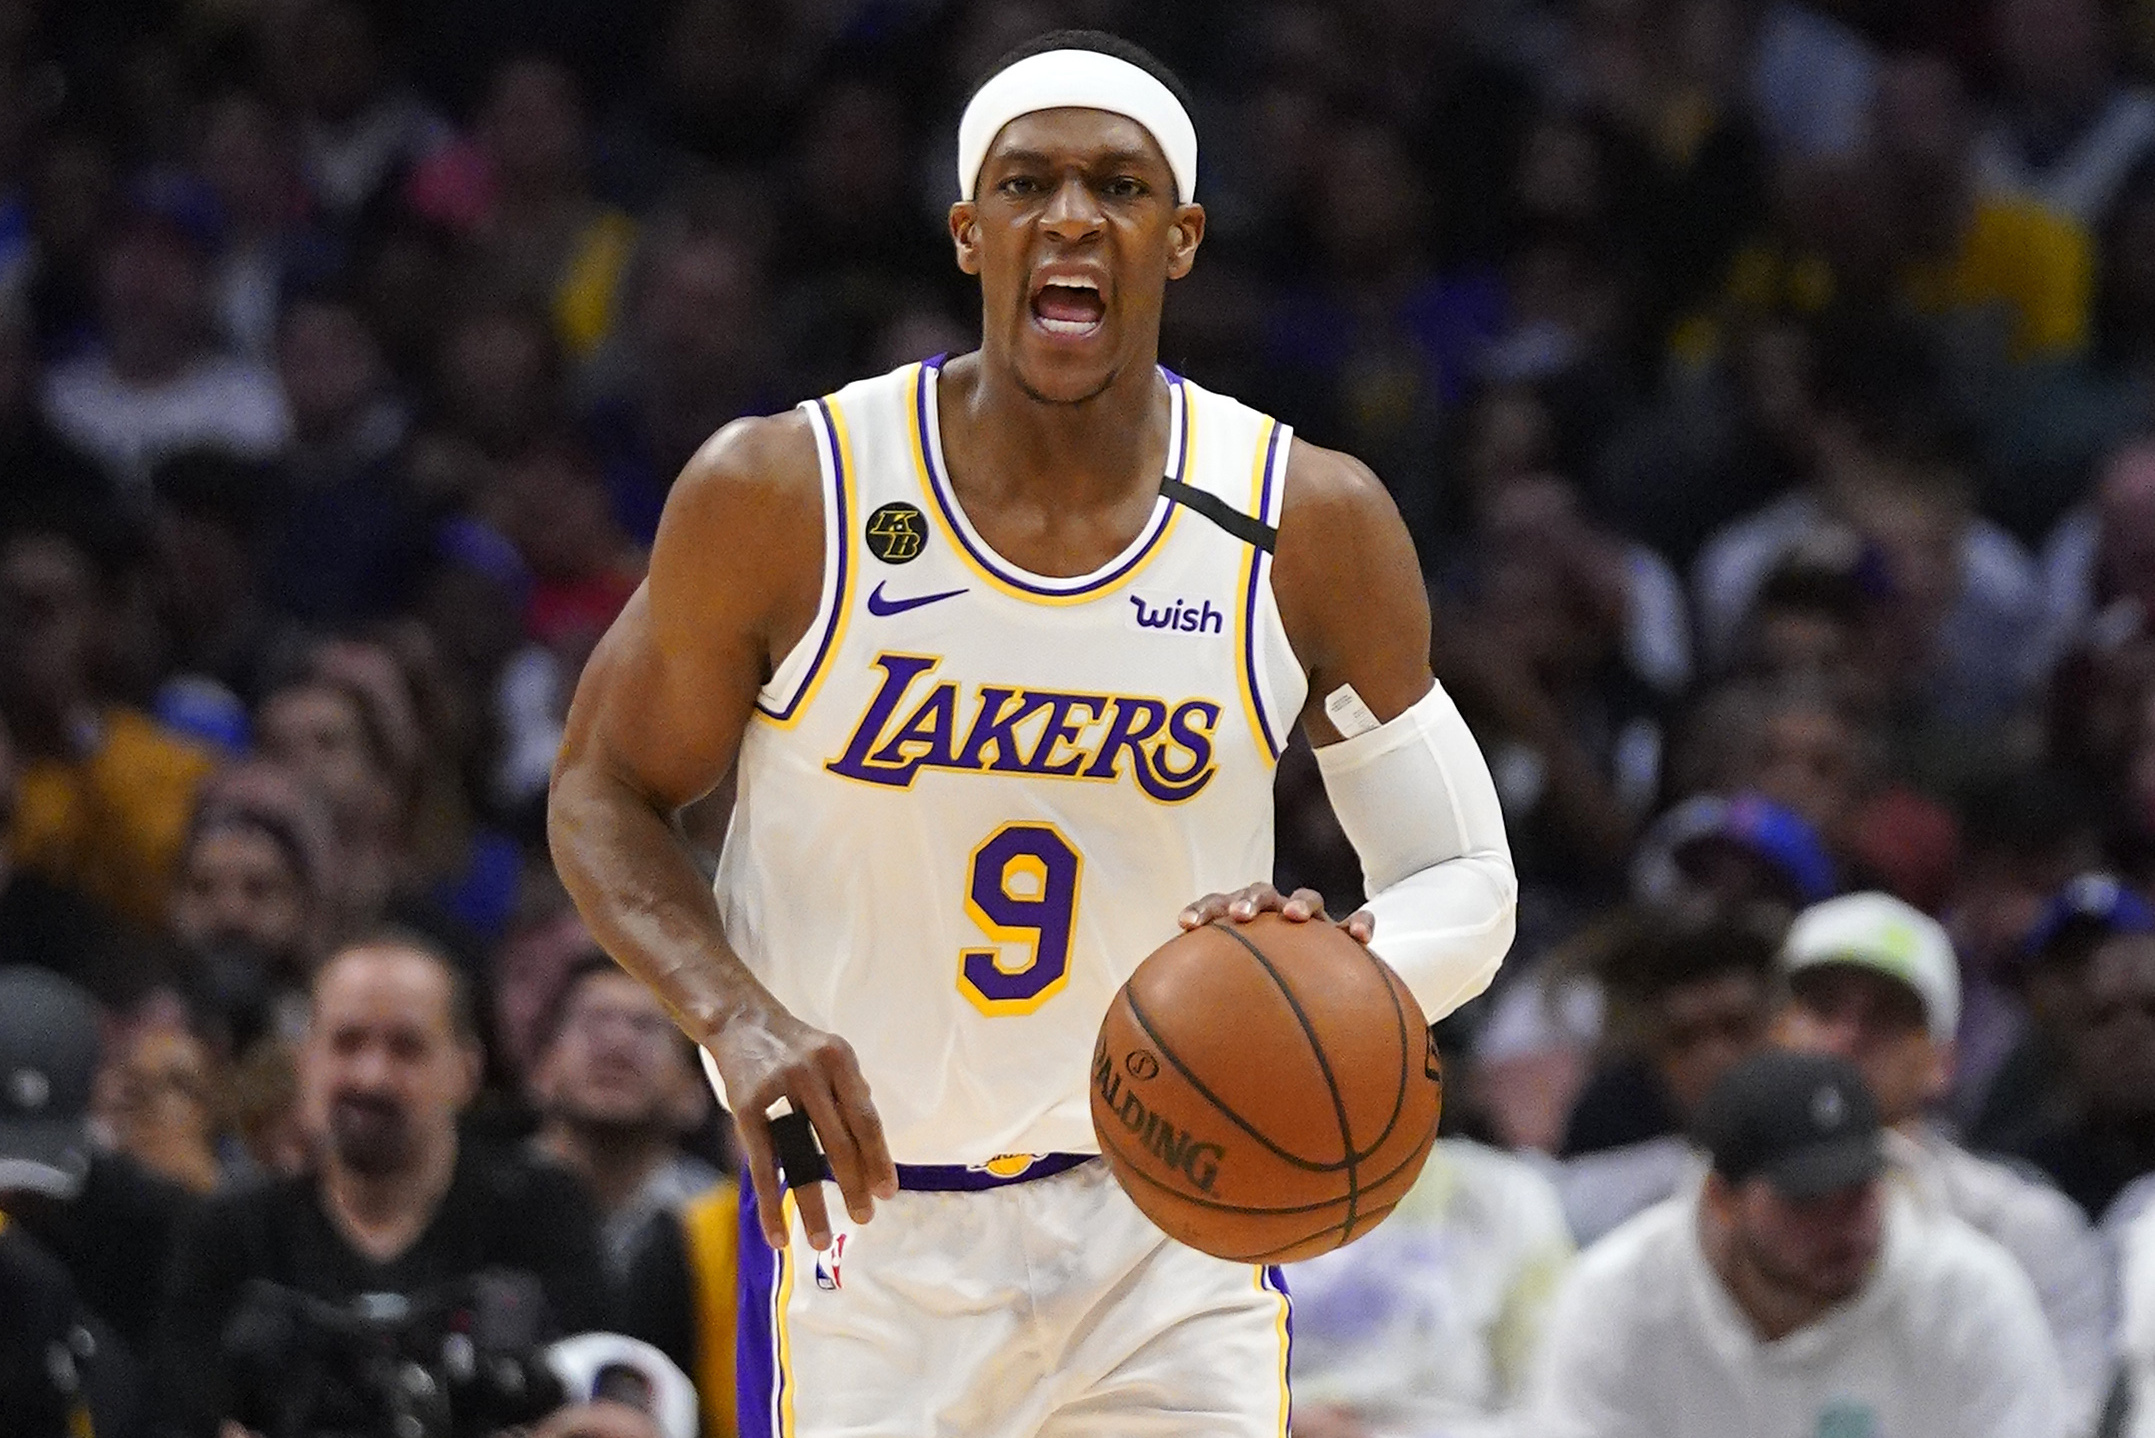 Lakers Injury News: Rajon Rondo Expected To Miss 4-5 Weeks After Undergoing  Surgery To Repair Ligament In Right Ring Finger